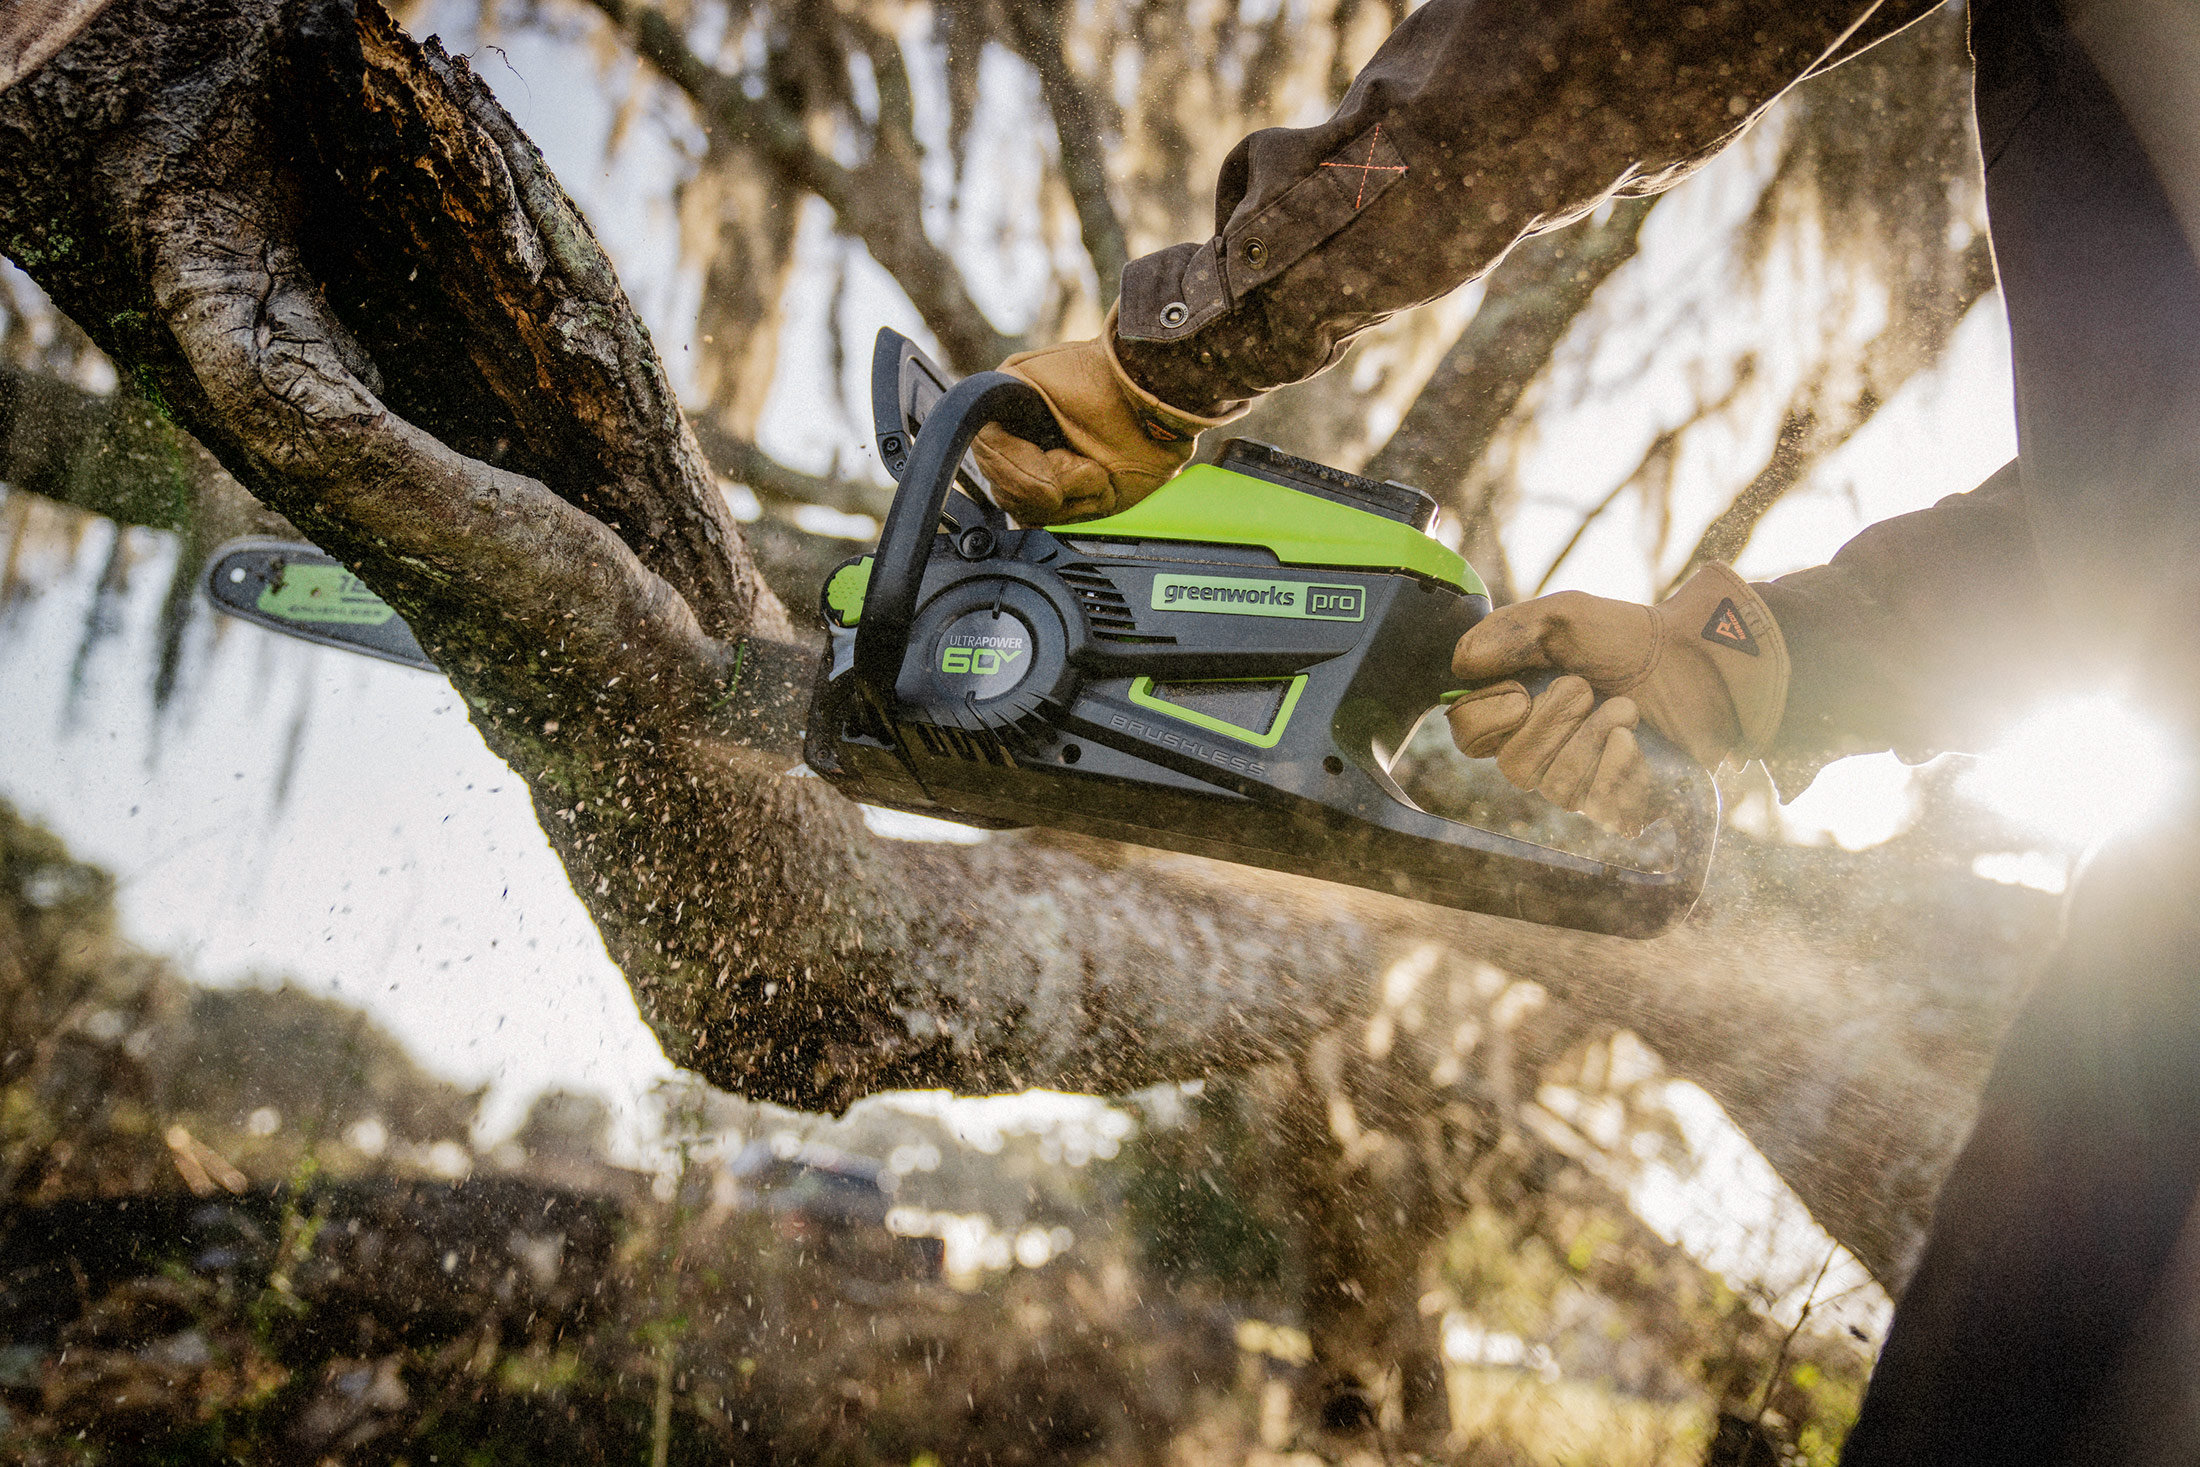 Greenworks Electric Chainsaw